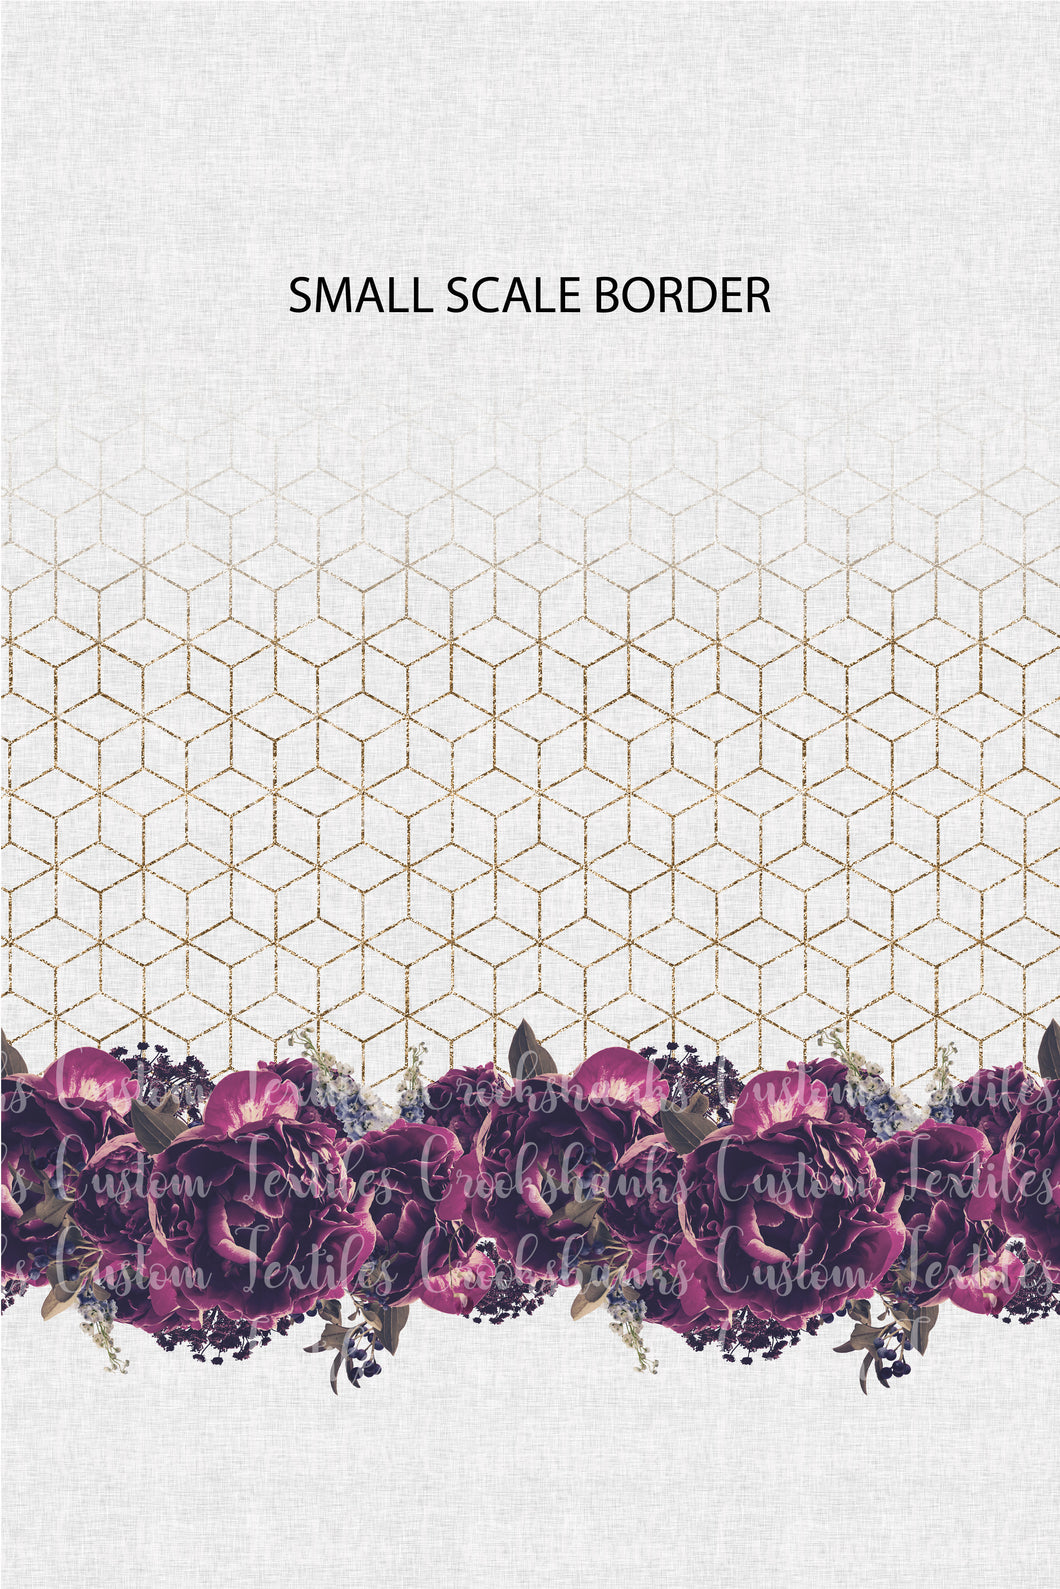 RETAIL - White Floral Border Print SMALLER SCALE - All Bases